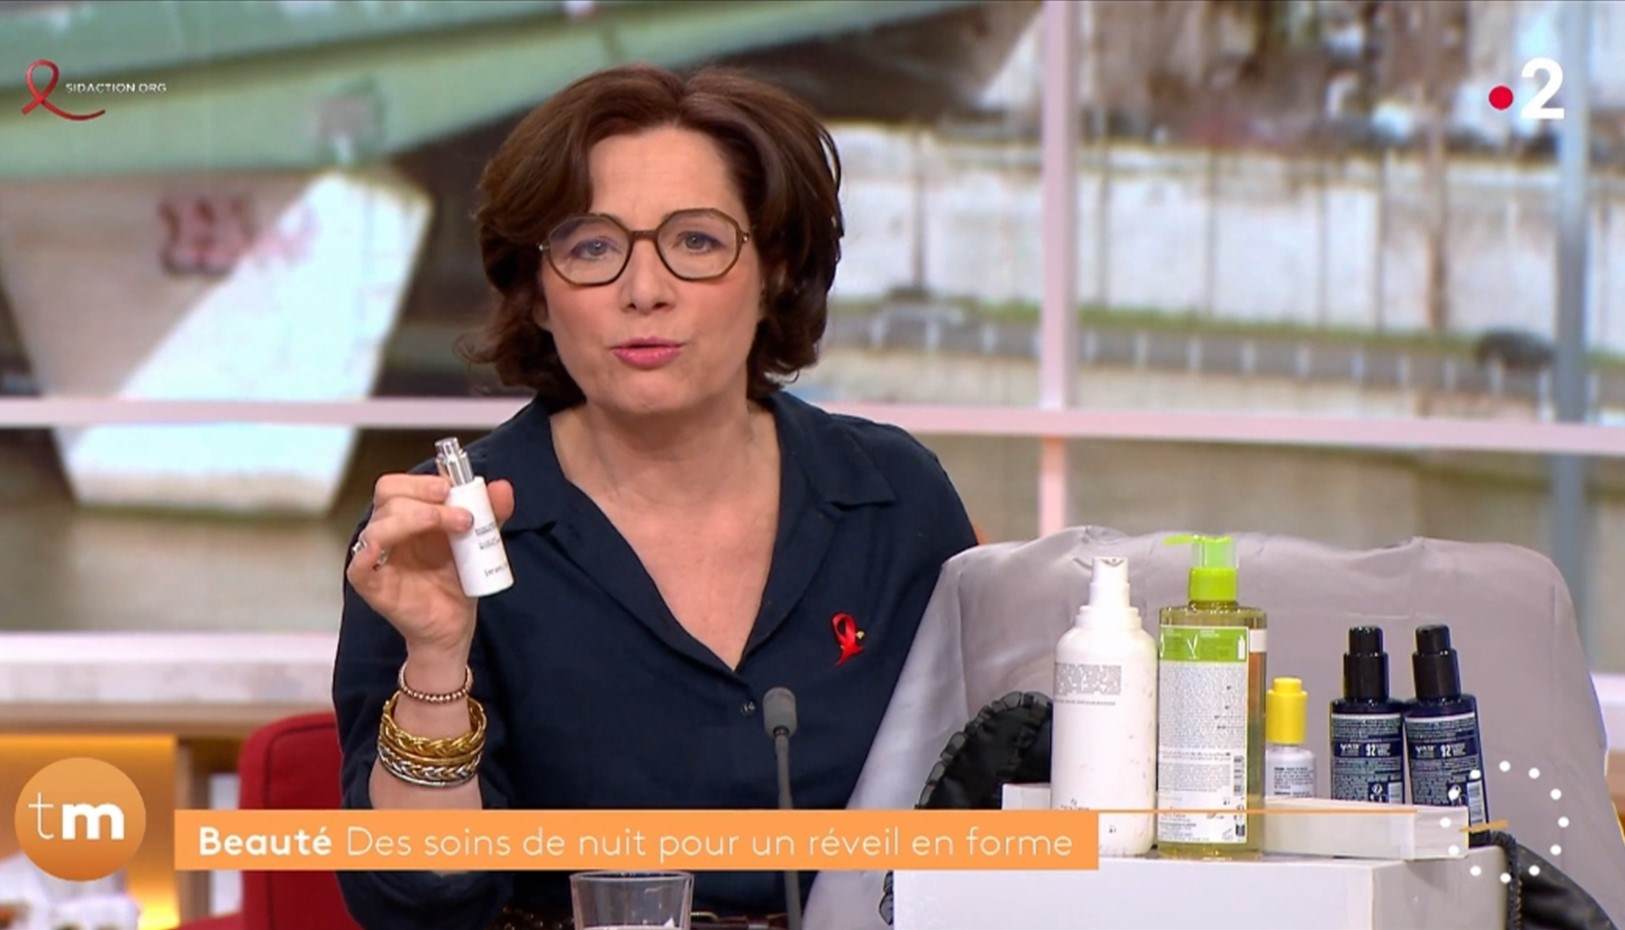 Load video: The Restful Sleep pillow mist seen on France 2